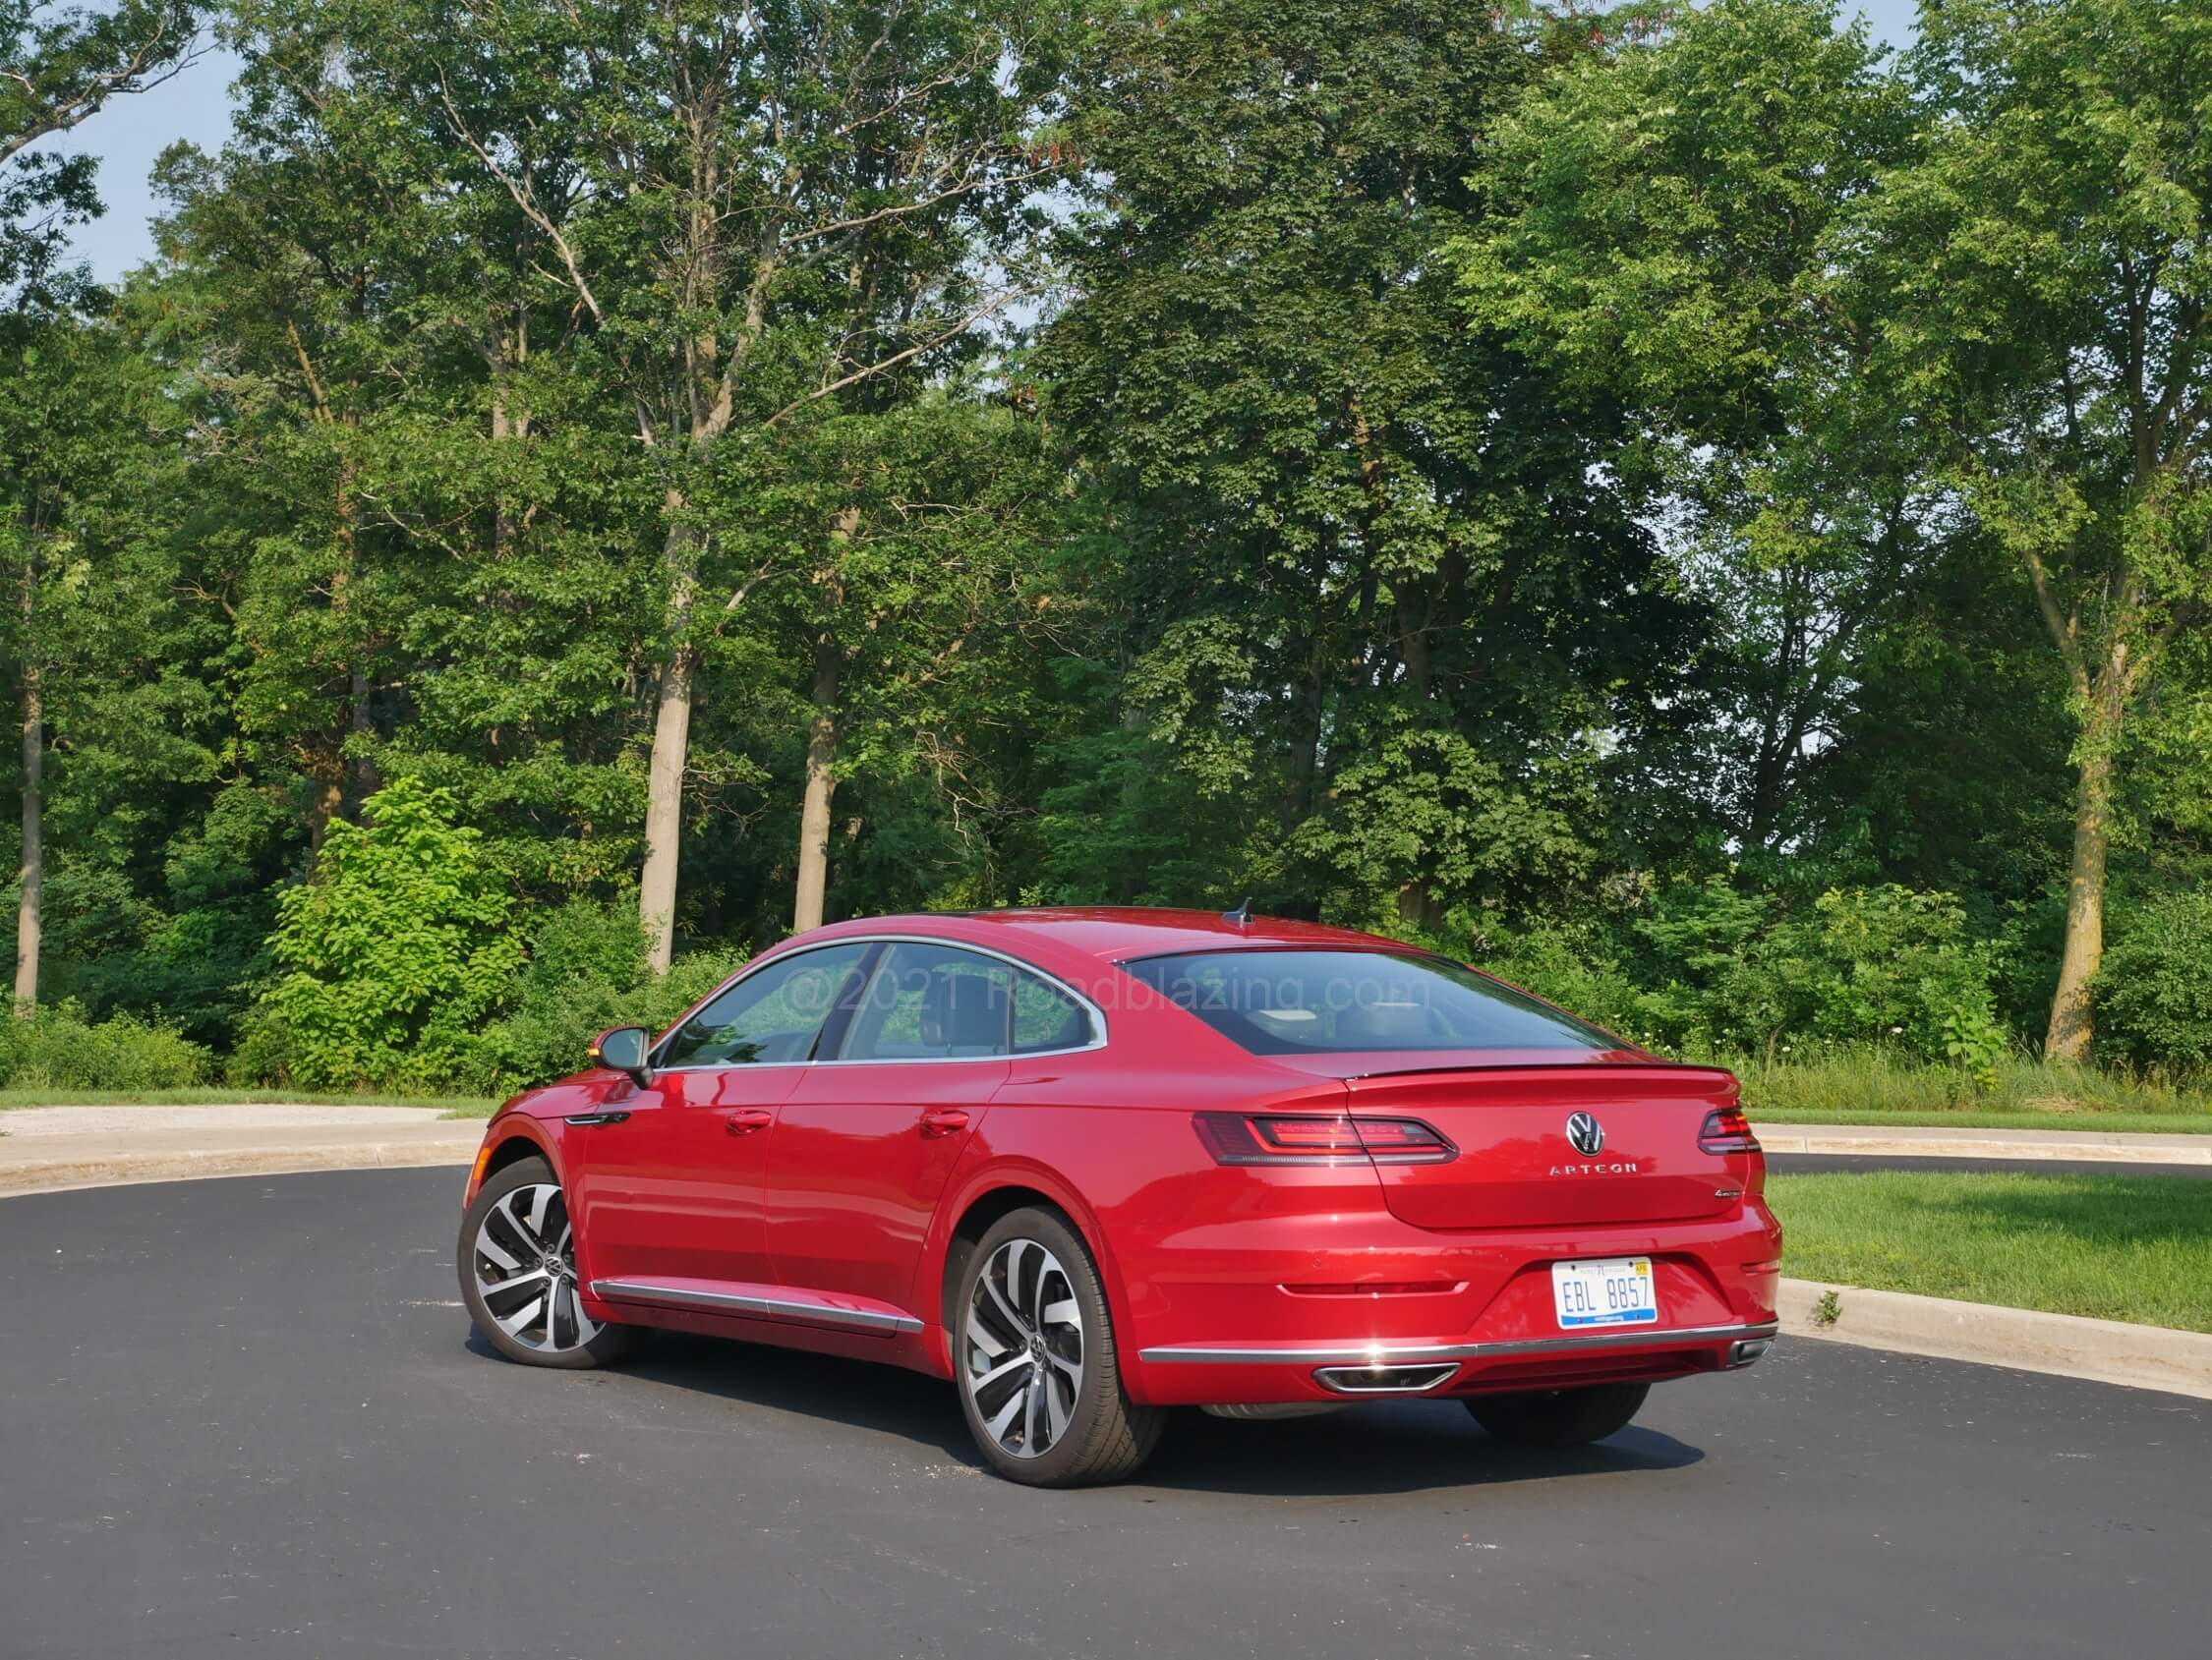 2021 Volkswagen Arteon 2.0T SEL R-Line 4Motion: "Artem" (Latin for "lines") include muscular fenders, flared rear quarters and a fastback profile for this executive sportback